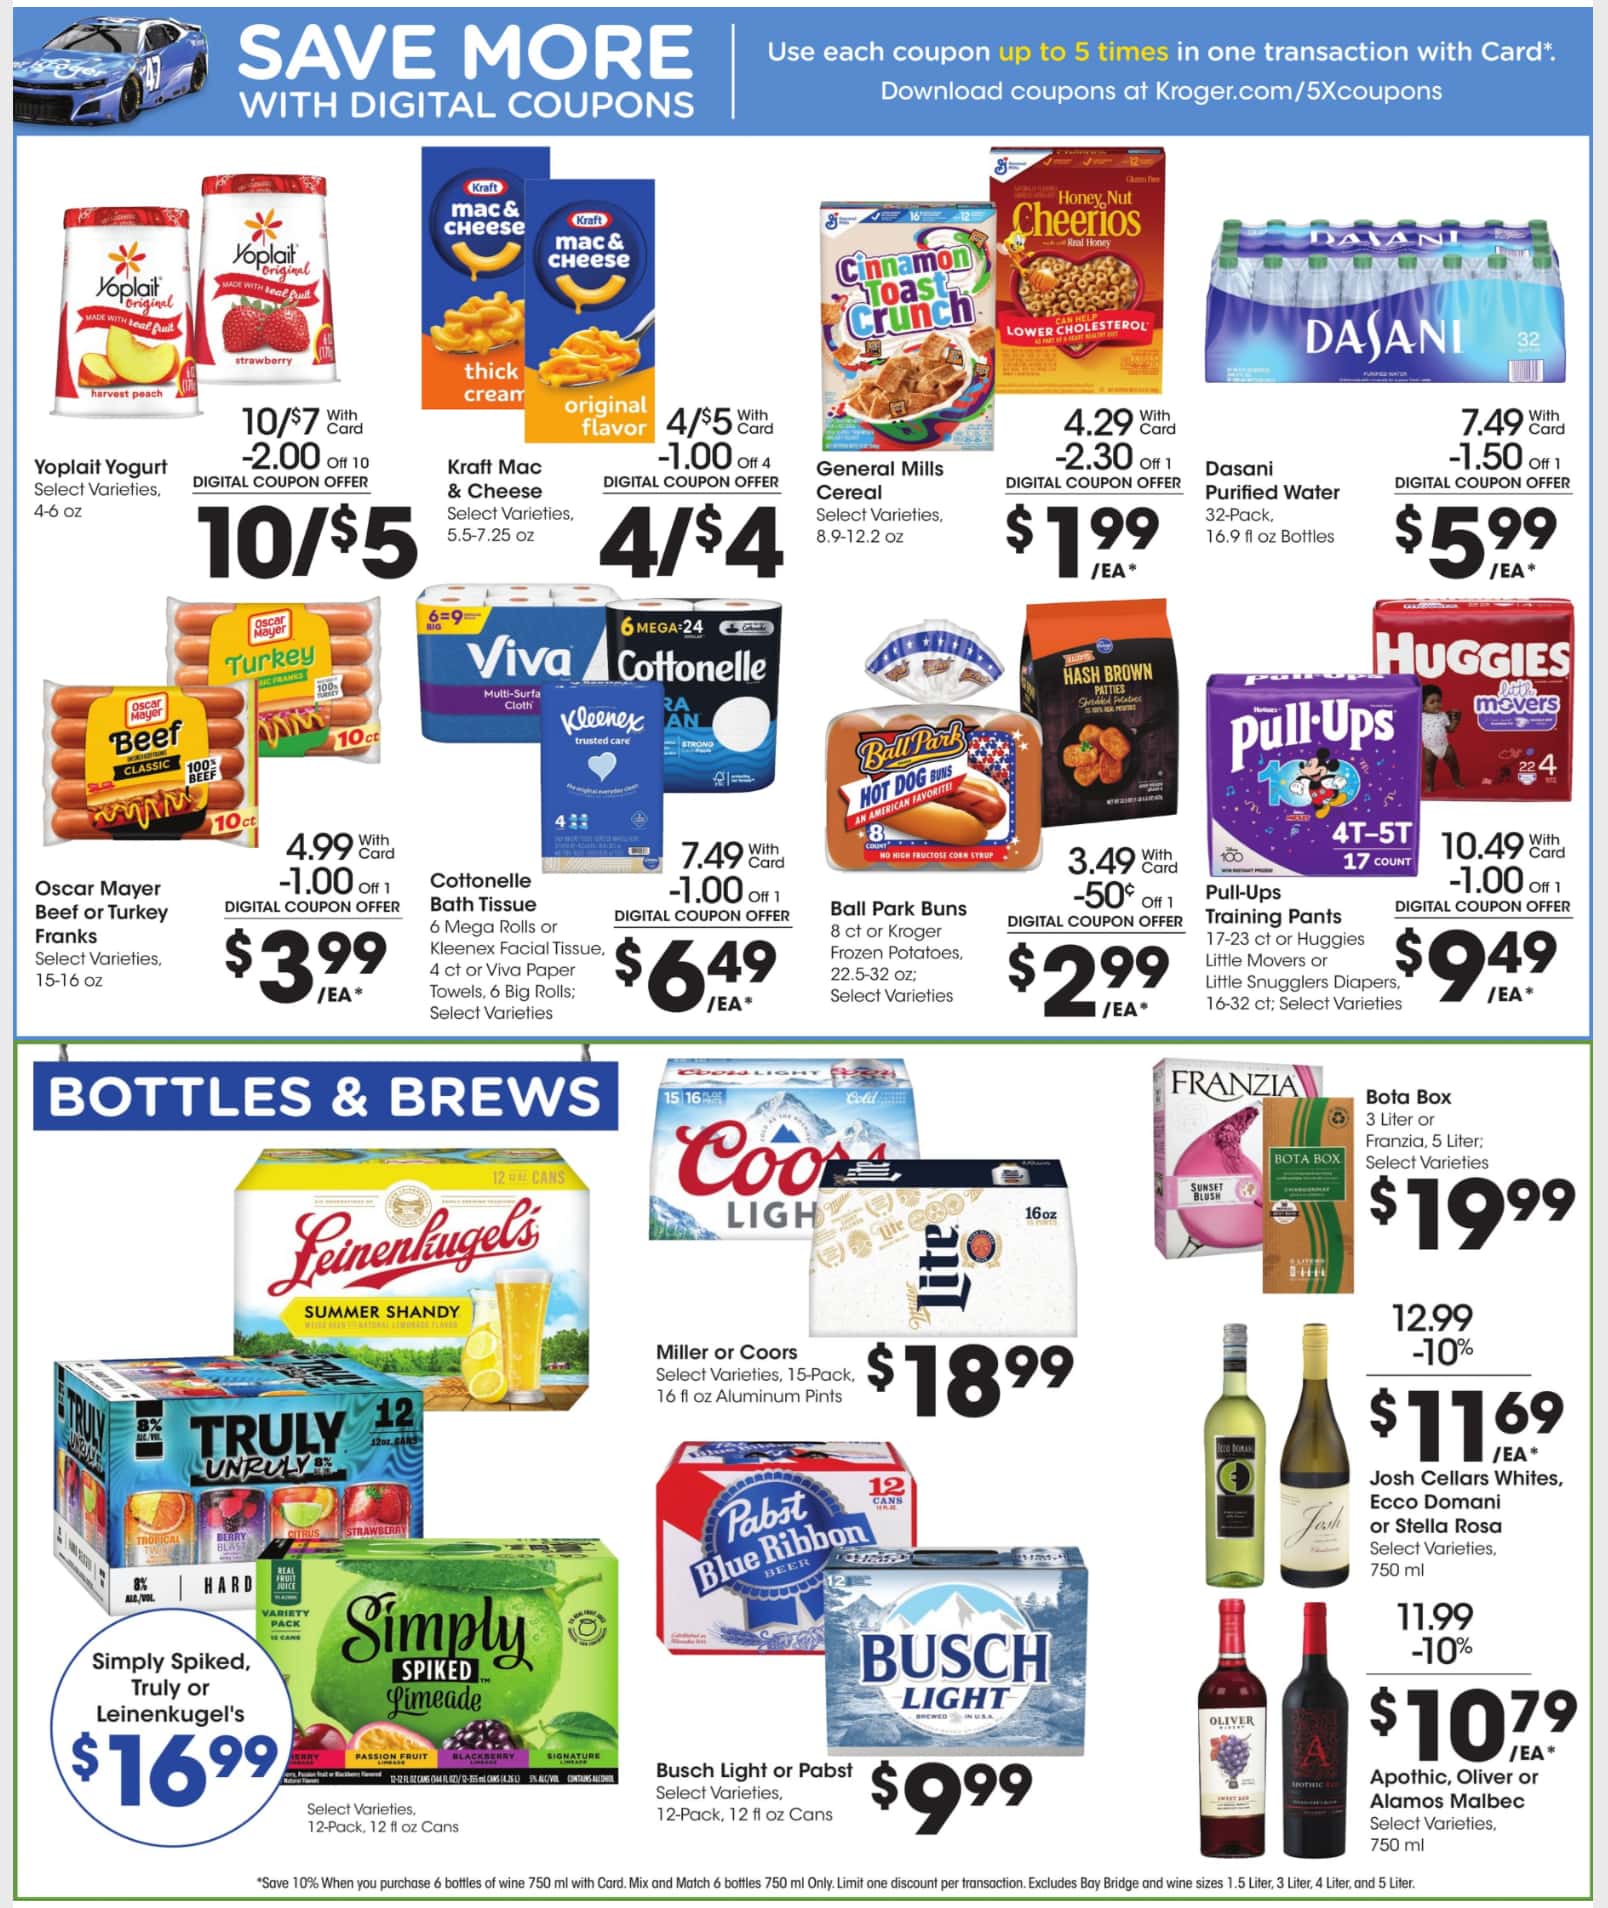 Kroger July 2024 Weekly Sales, Deals, Discounts and Digital Coupons.